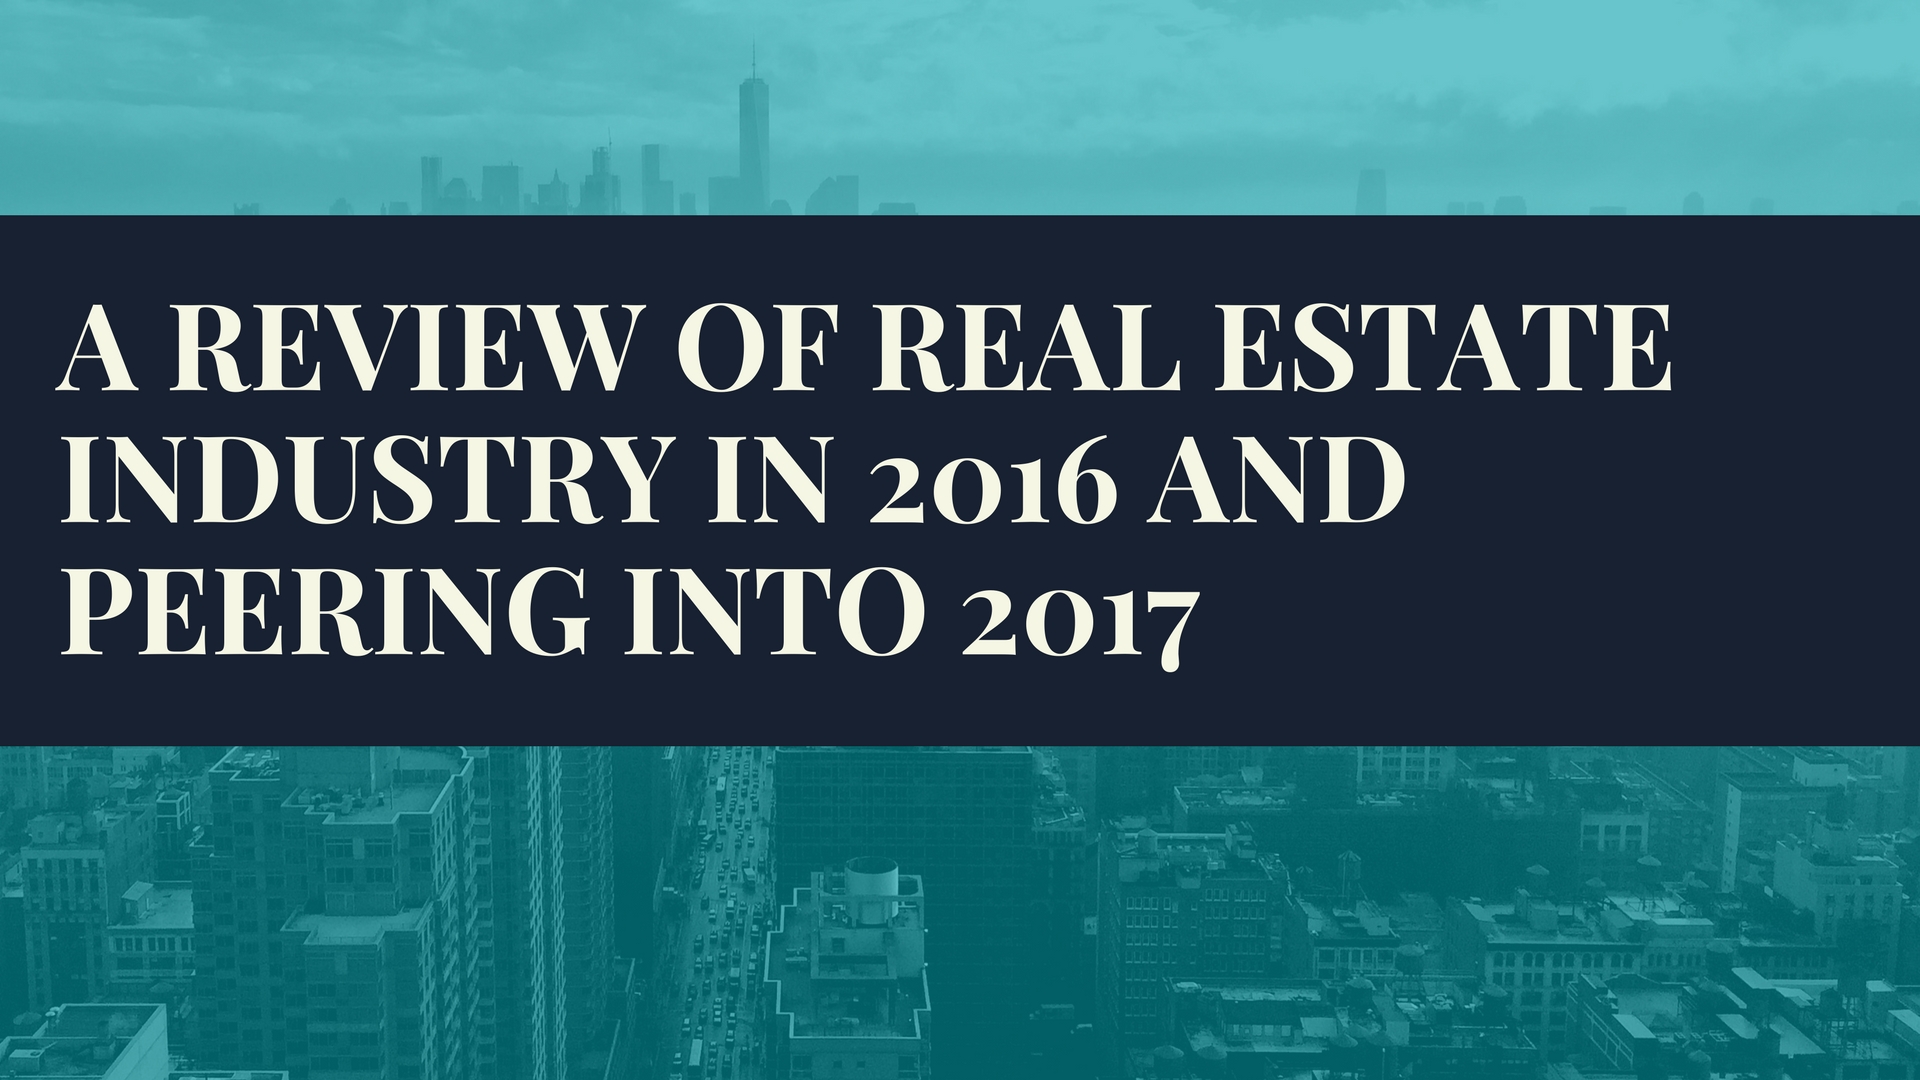 A review of real estate industry in 2016 an peering into 2017